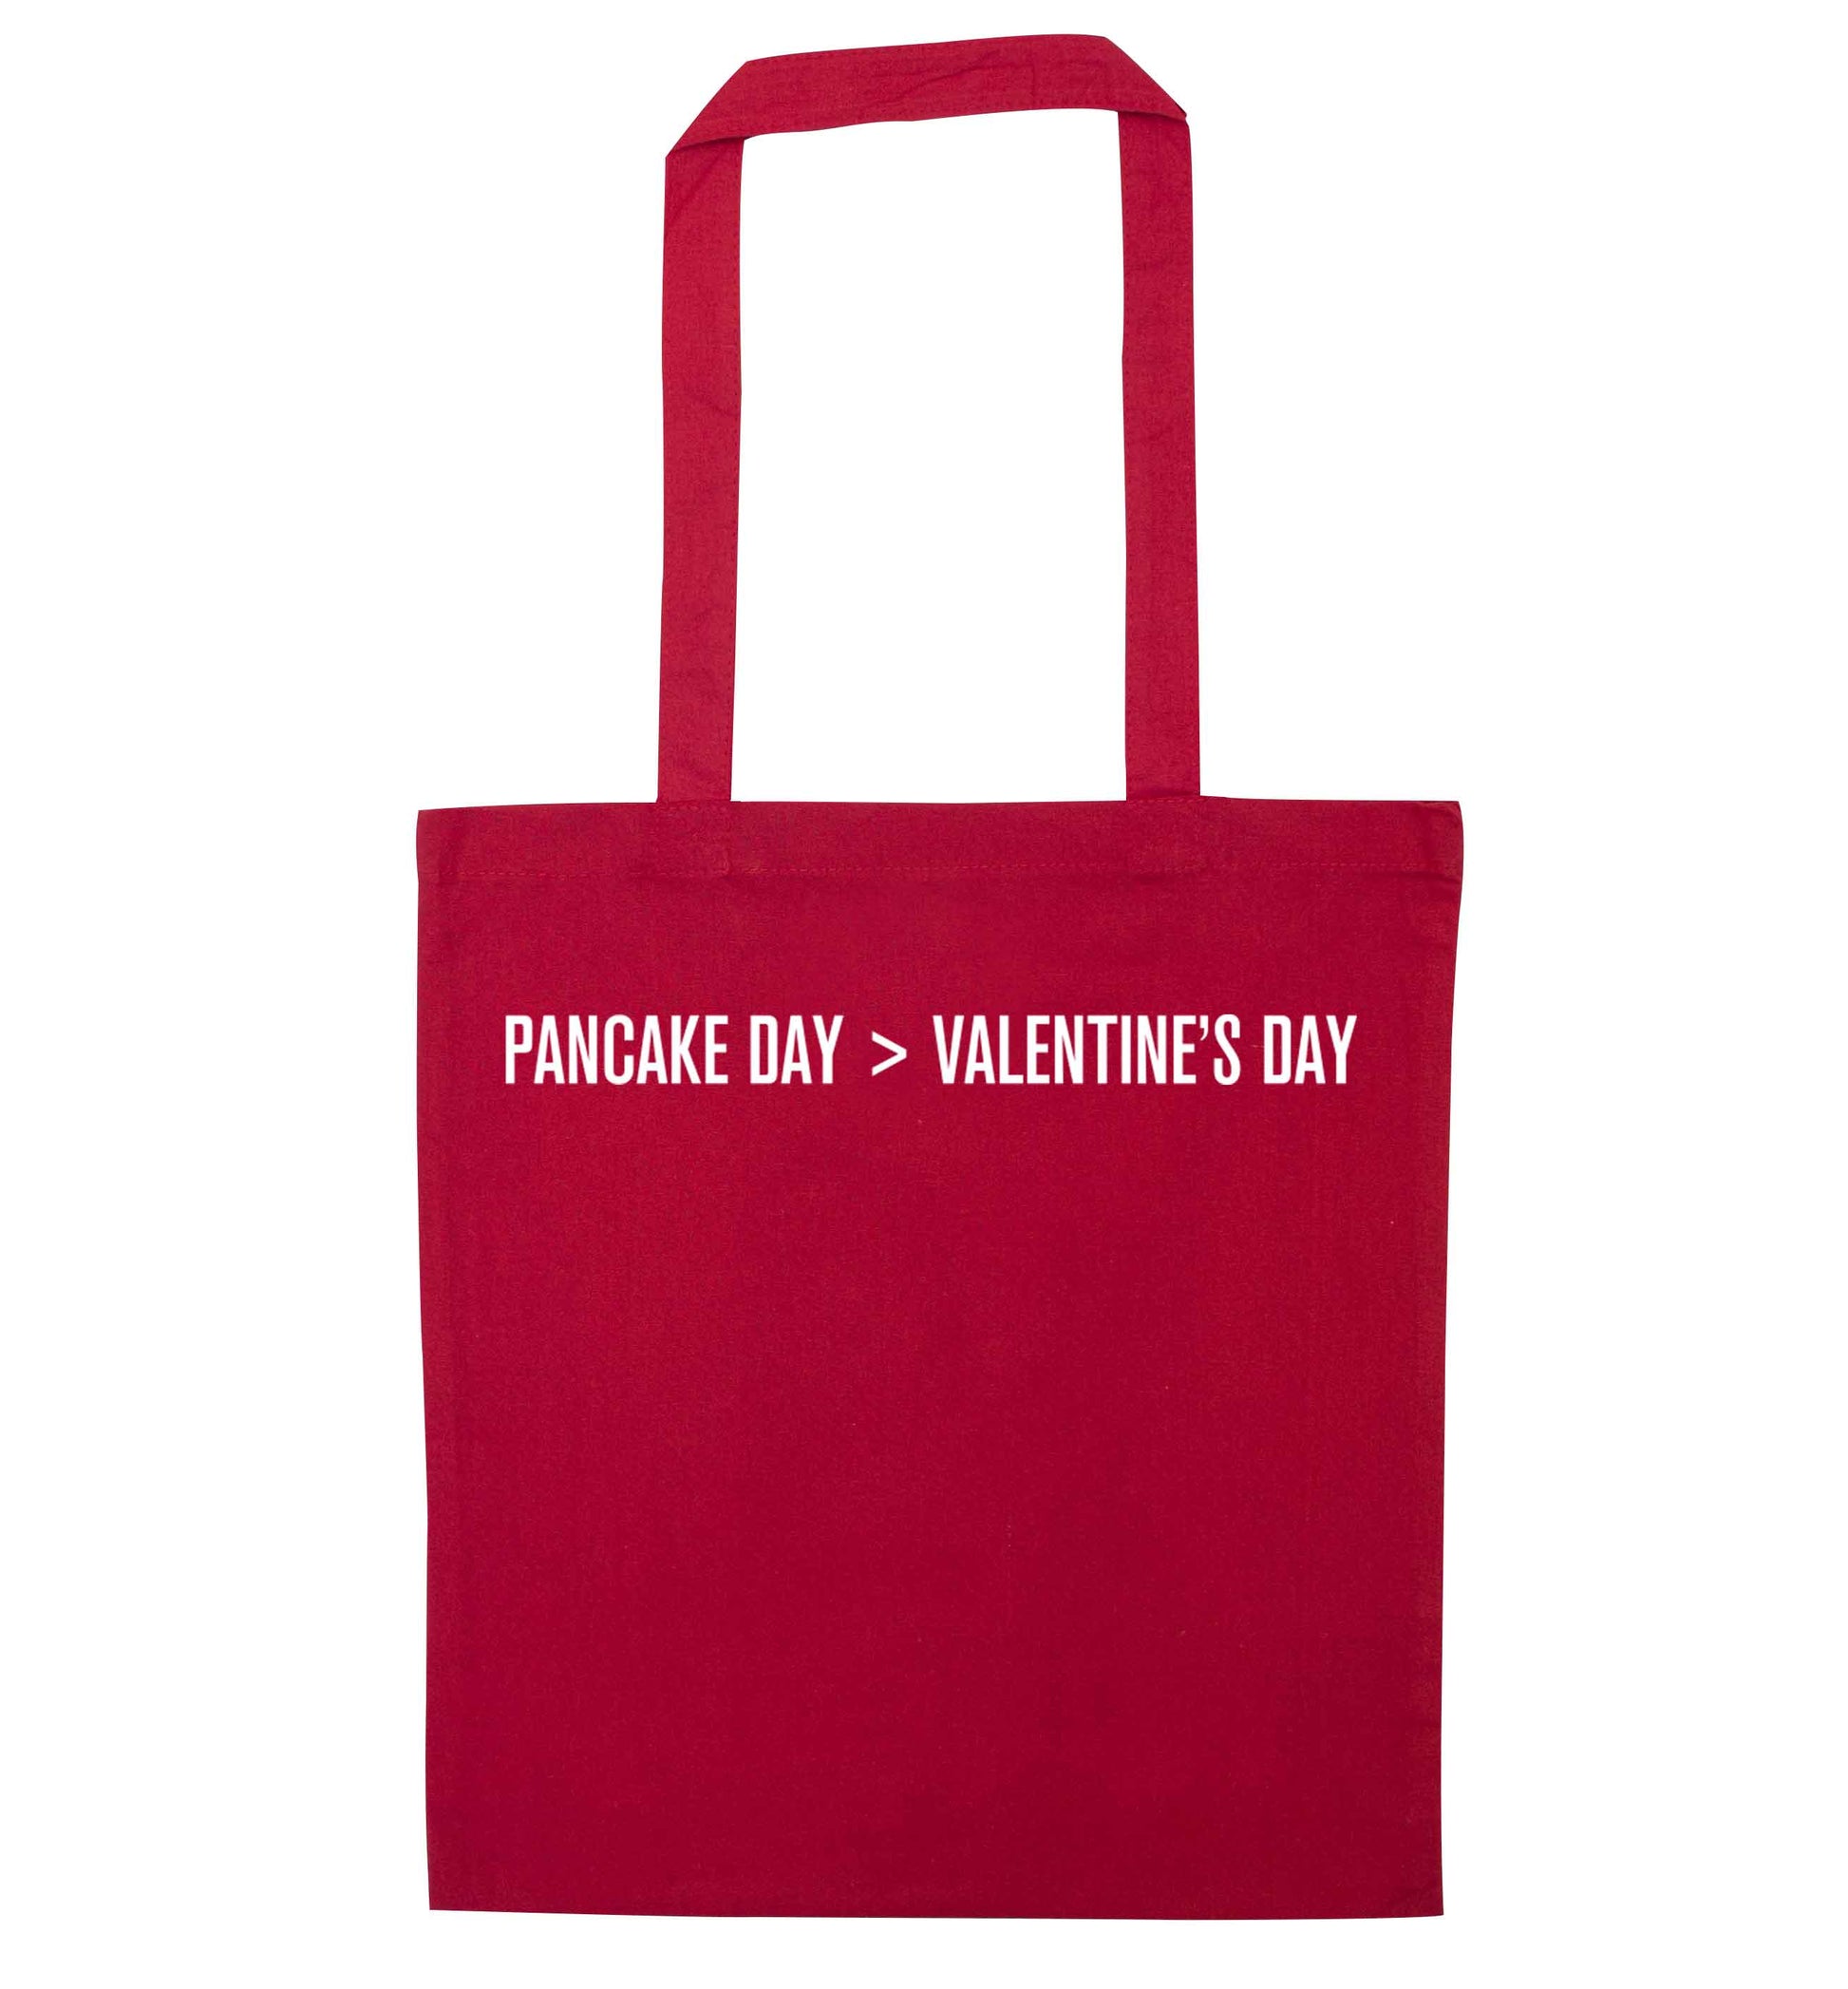 Pancake day > valentines day red tote bag